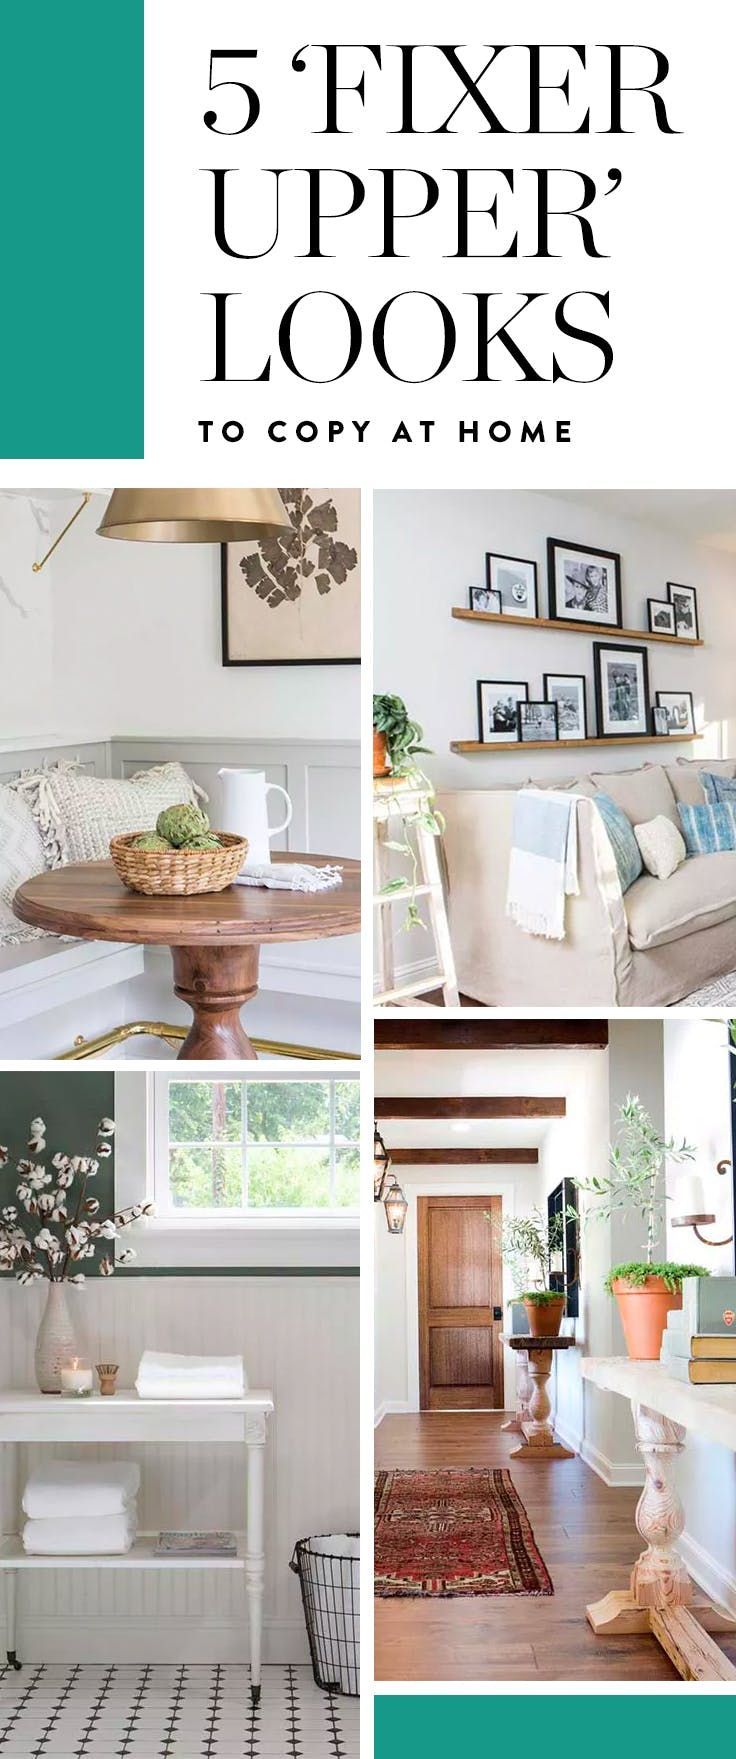 5 ‘Fixer Upper' Looks You Can Totally Copy at Home -   9 home accessories Design fixer upper ideas